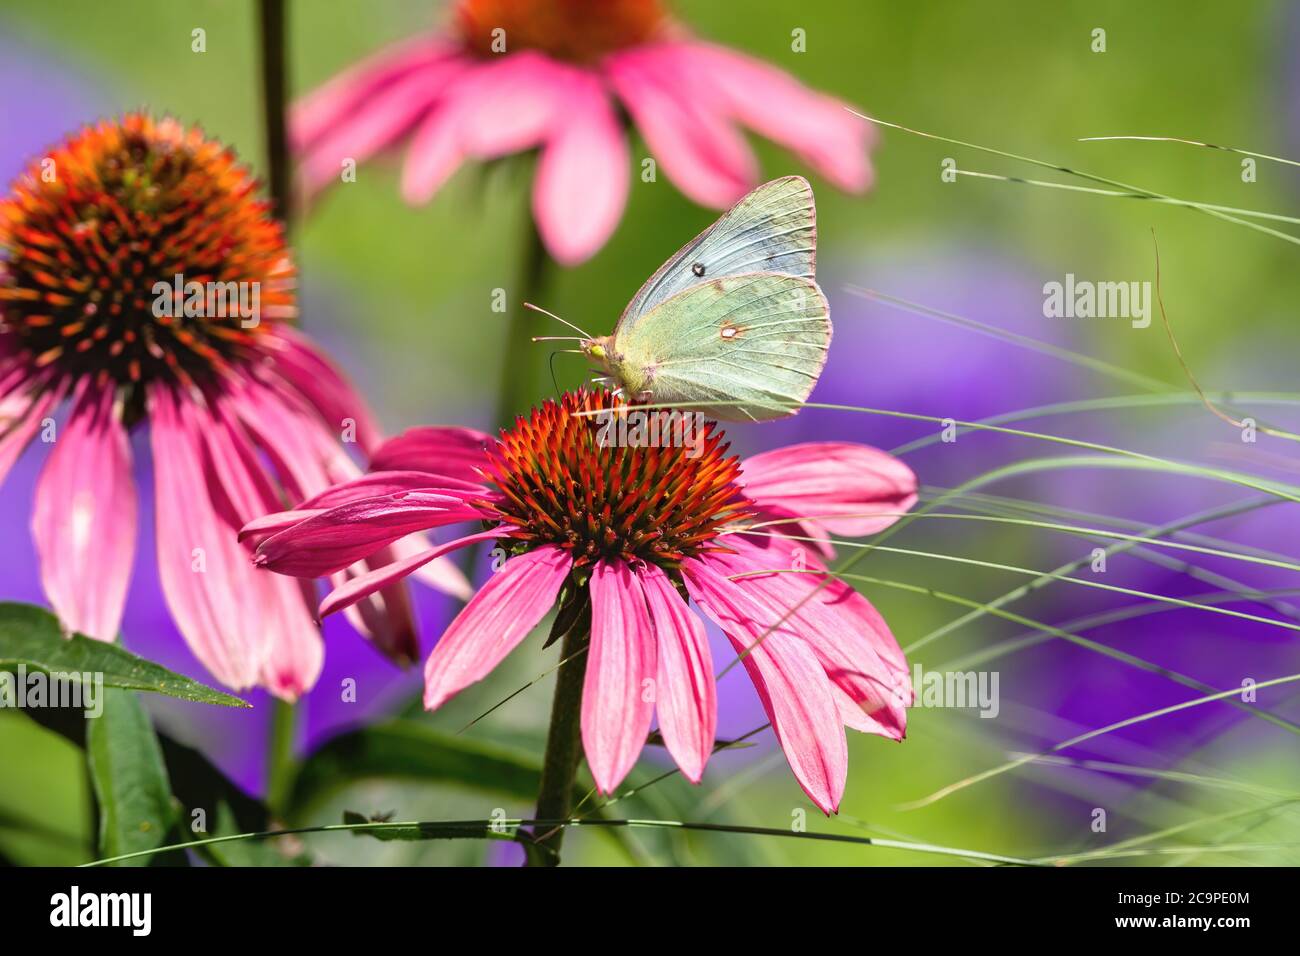 A Orange Sulphur Butterfly of the White Phase variety collecting nectar on a pink Echinacea flower in a multi colored garden setting. Stock Photo